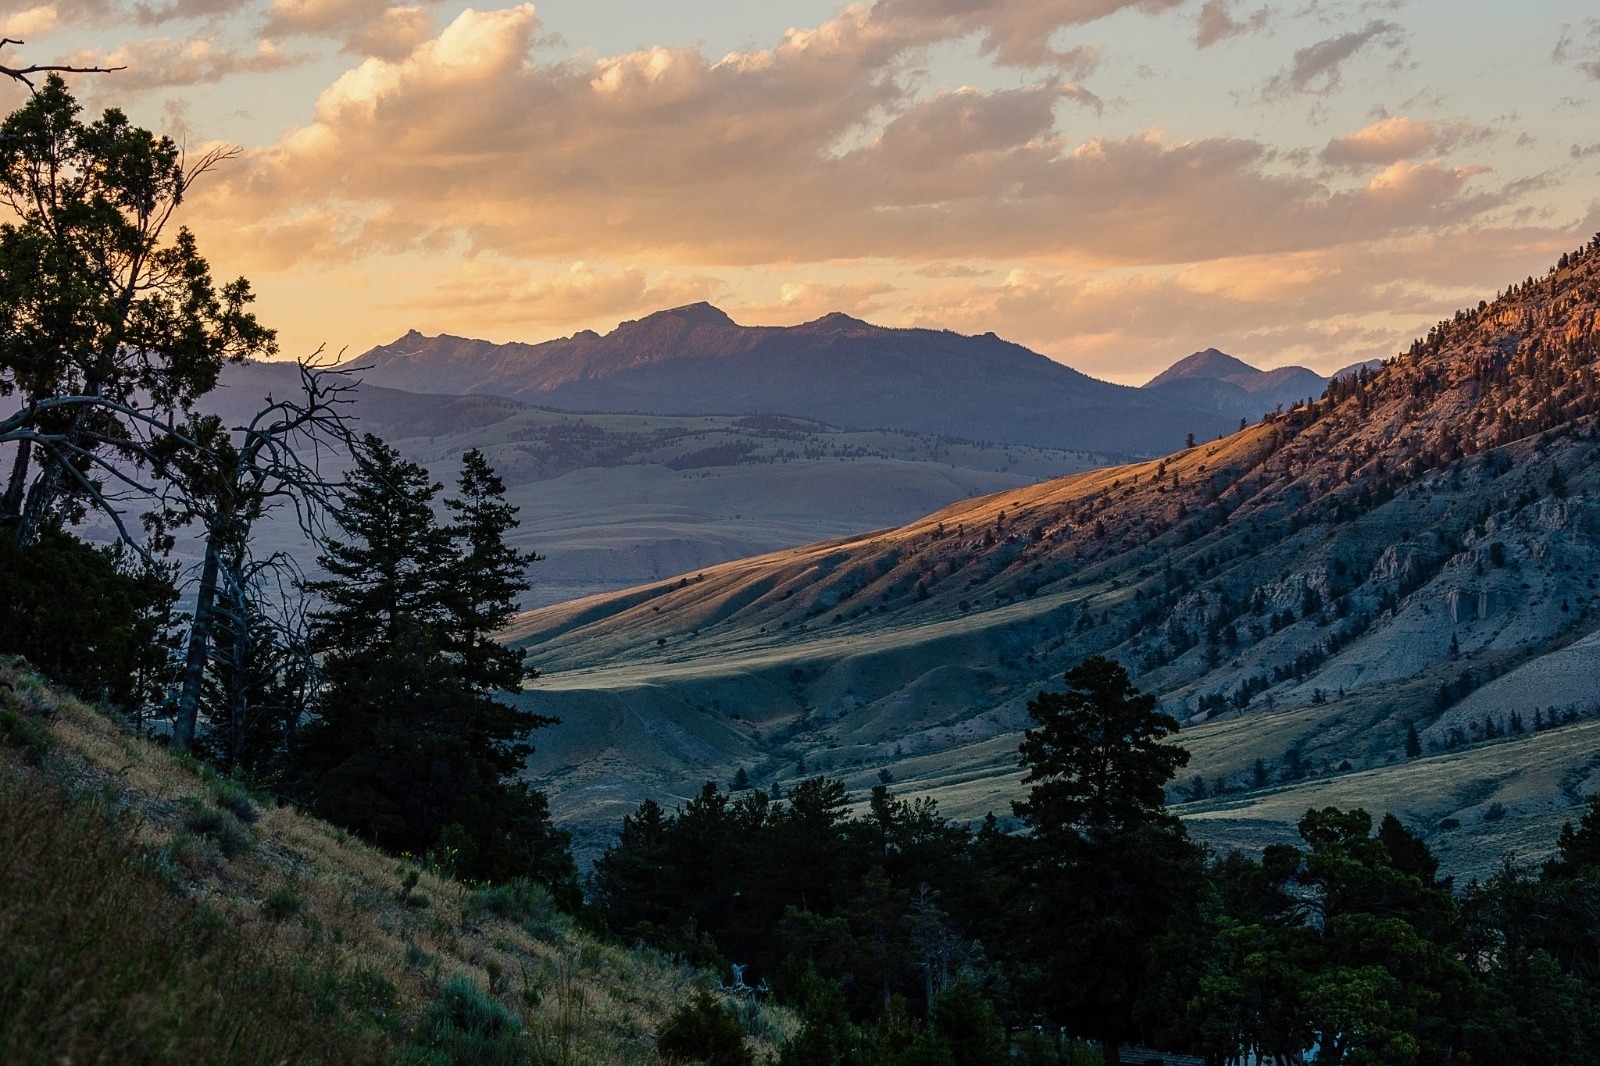 Monitor Peak at sunset—one view from Yellowstone headquarters at Mammoth Hot Springs. For Wenk, working as superintendent of Yellowstone was the highest honor a Park Service veteran could have and every day he didn't flinch or lament the controversies but saw them as a way to build upon Yellowstone's rising beloved status among American people. He saw flickers of light flash in the eyes of visitors when they realized the country's first national park belonged to them too.